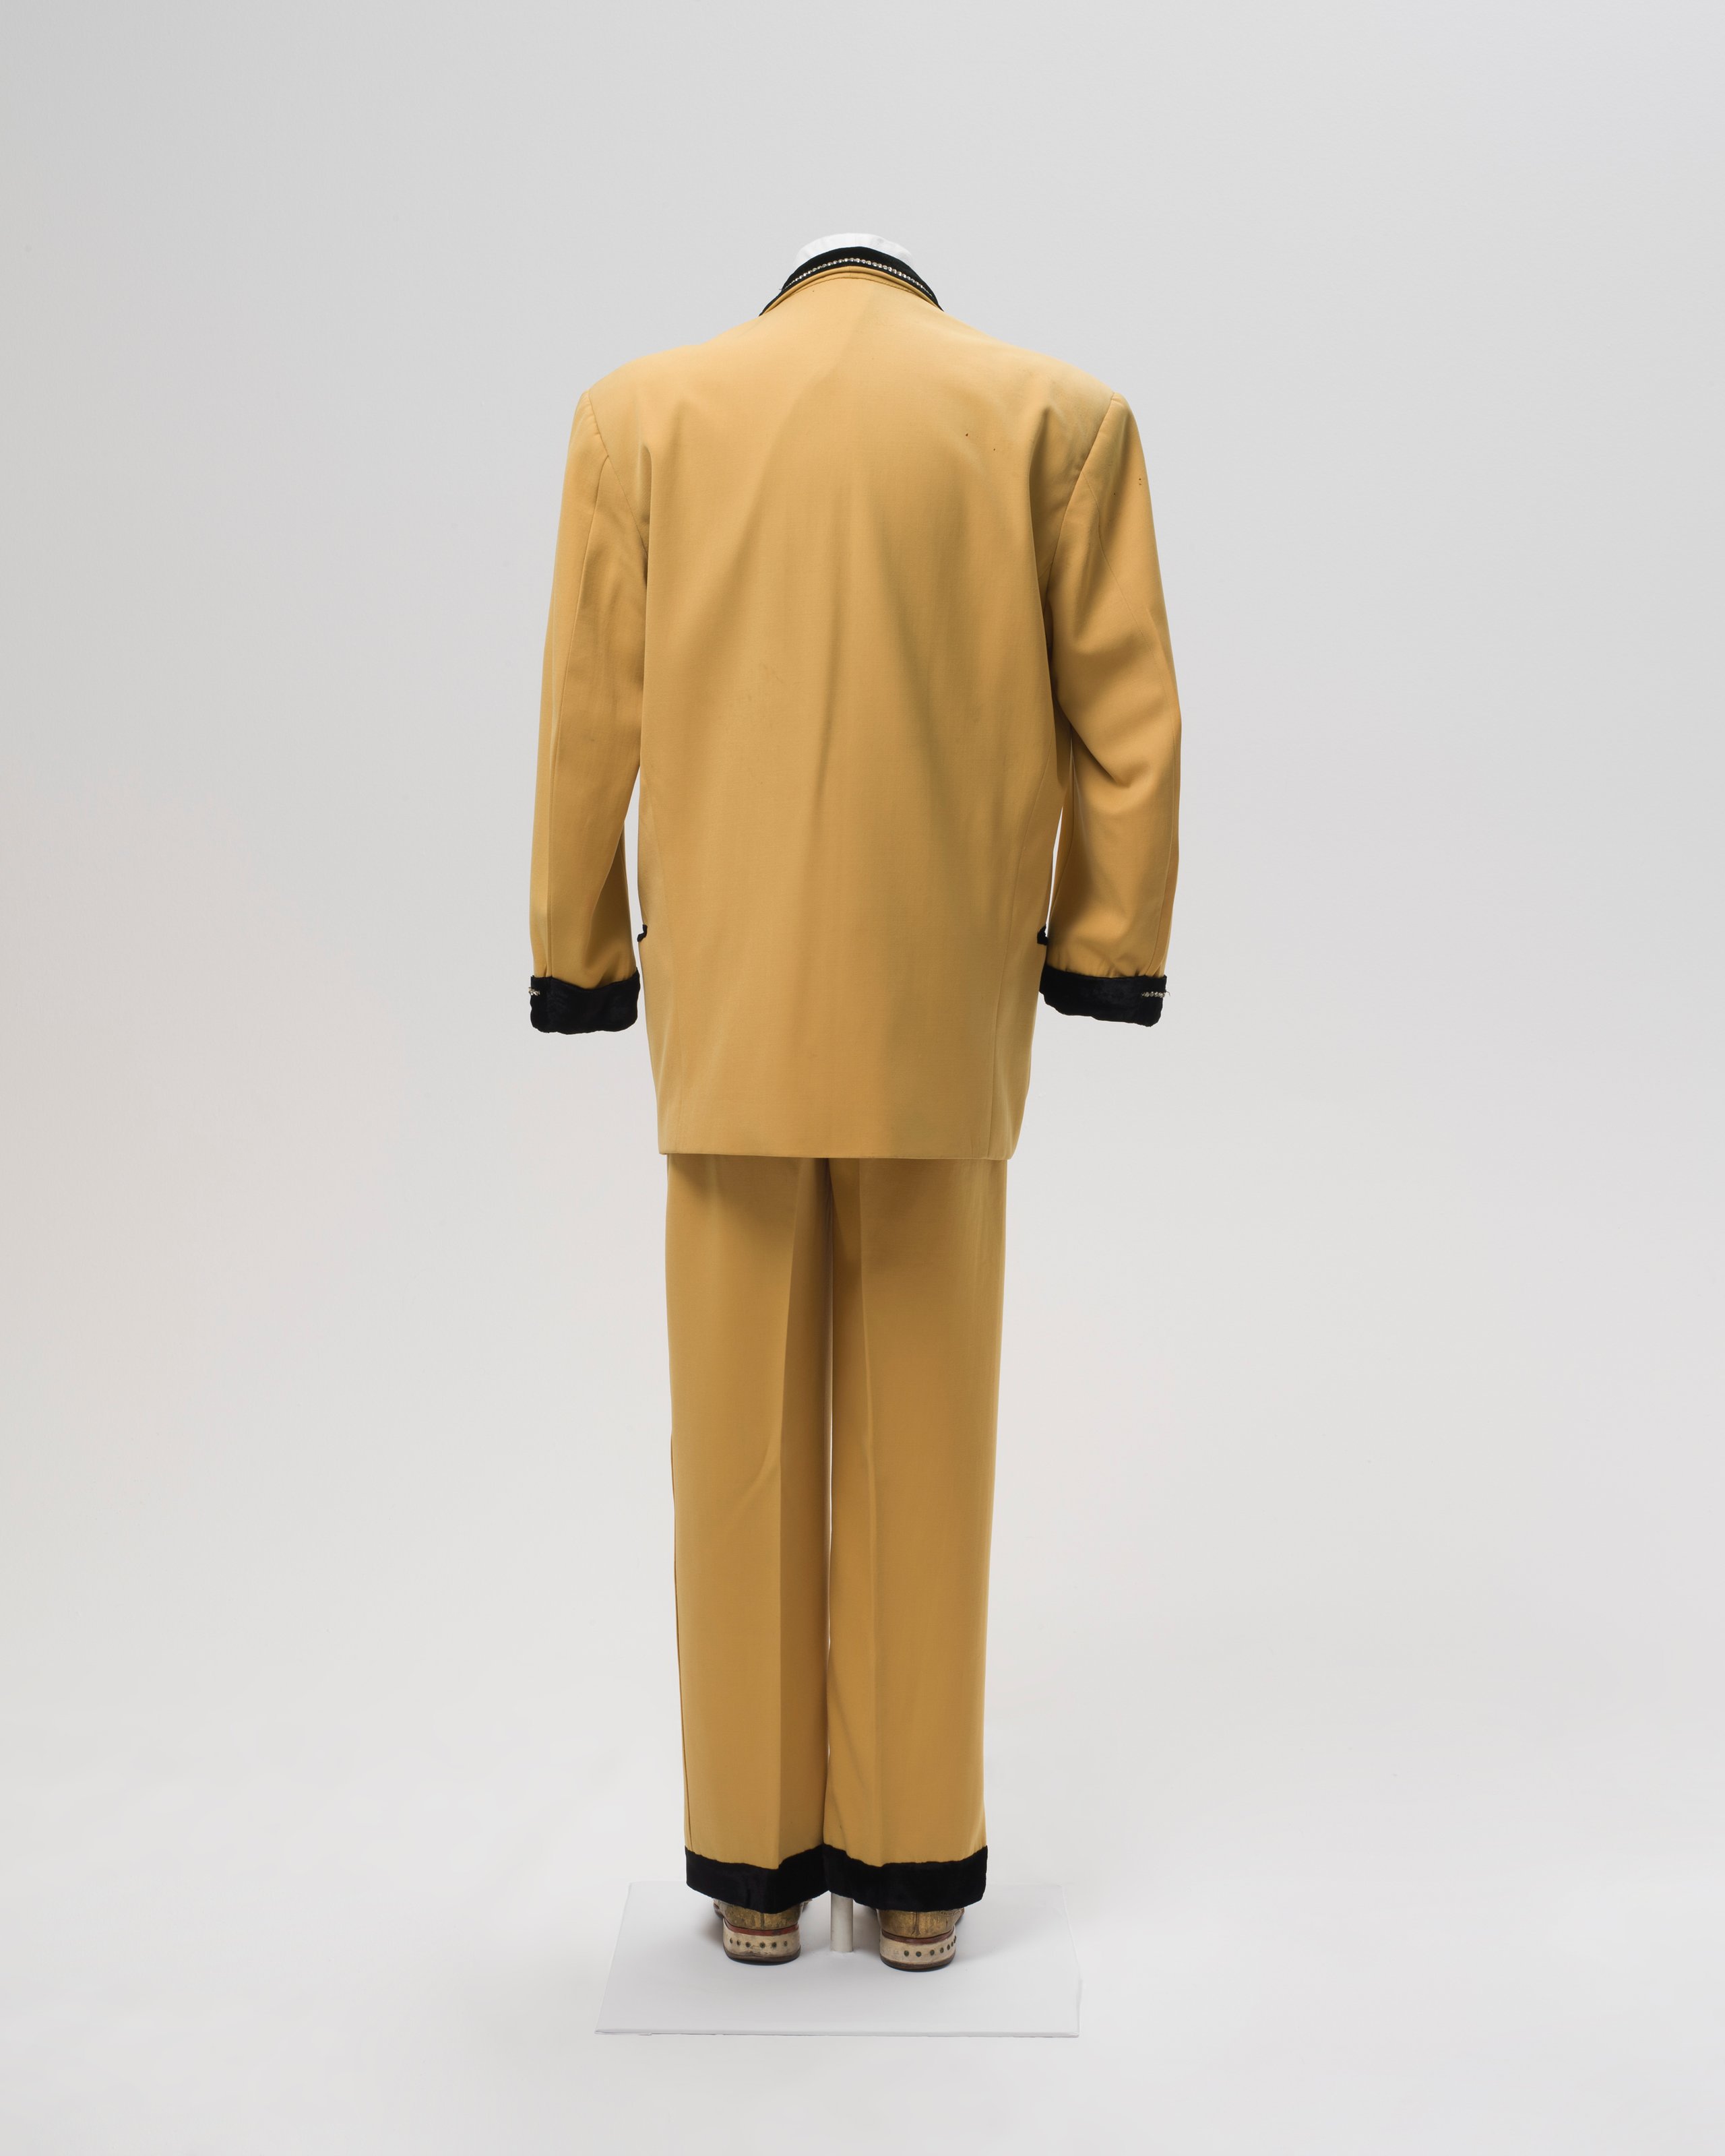 Suit worn by Johnny O'Keefe and made by Len Taylor